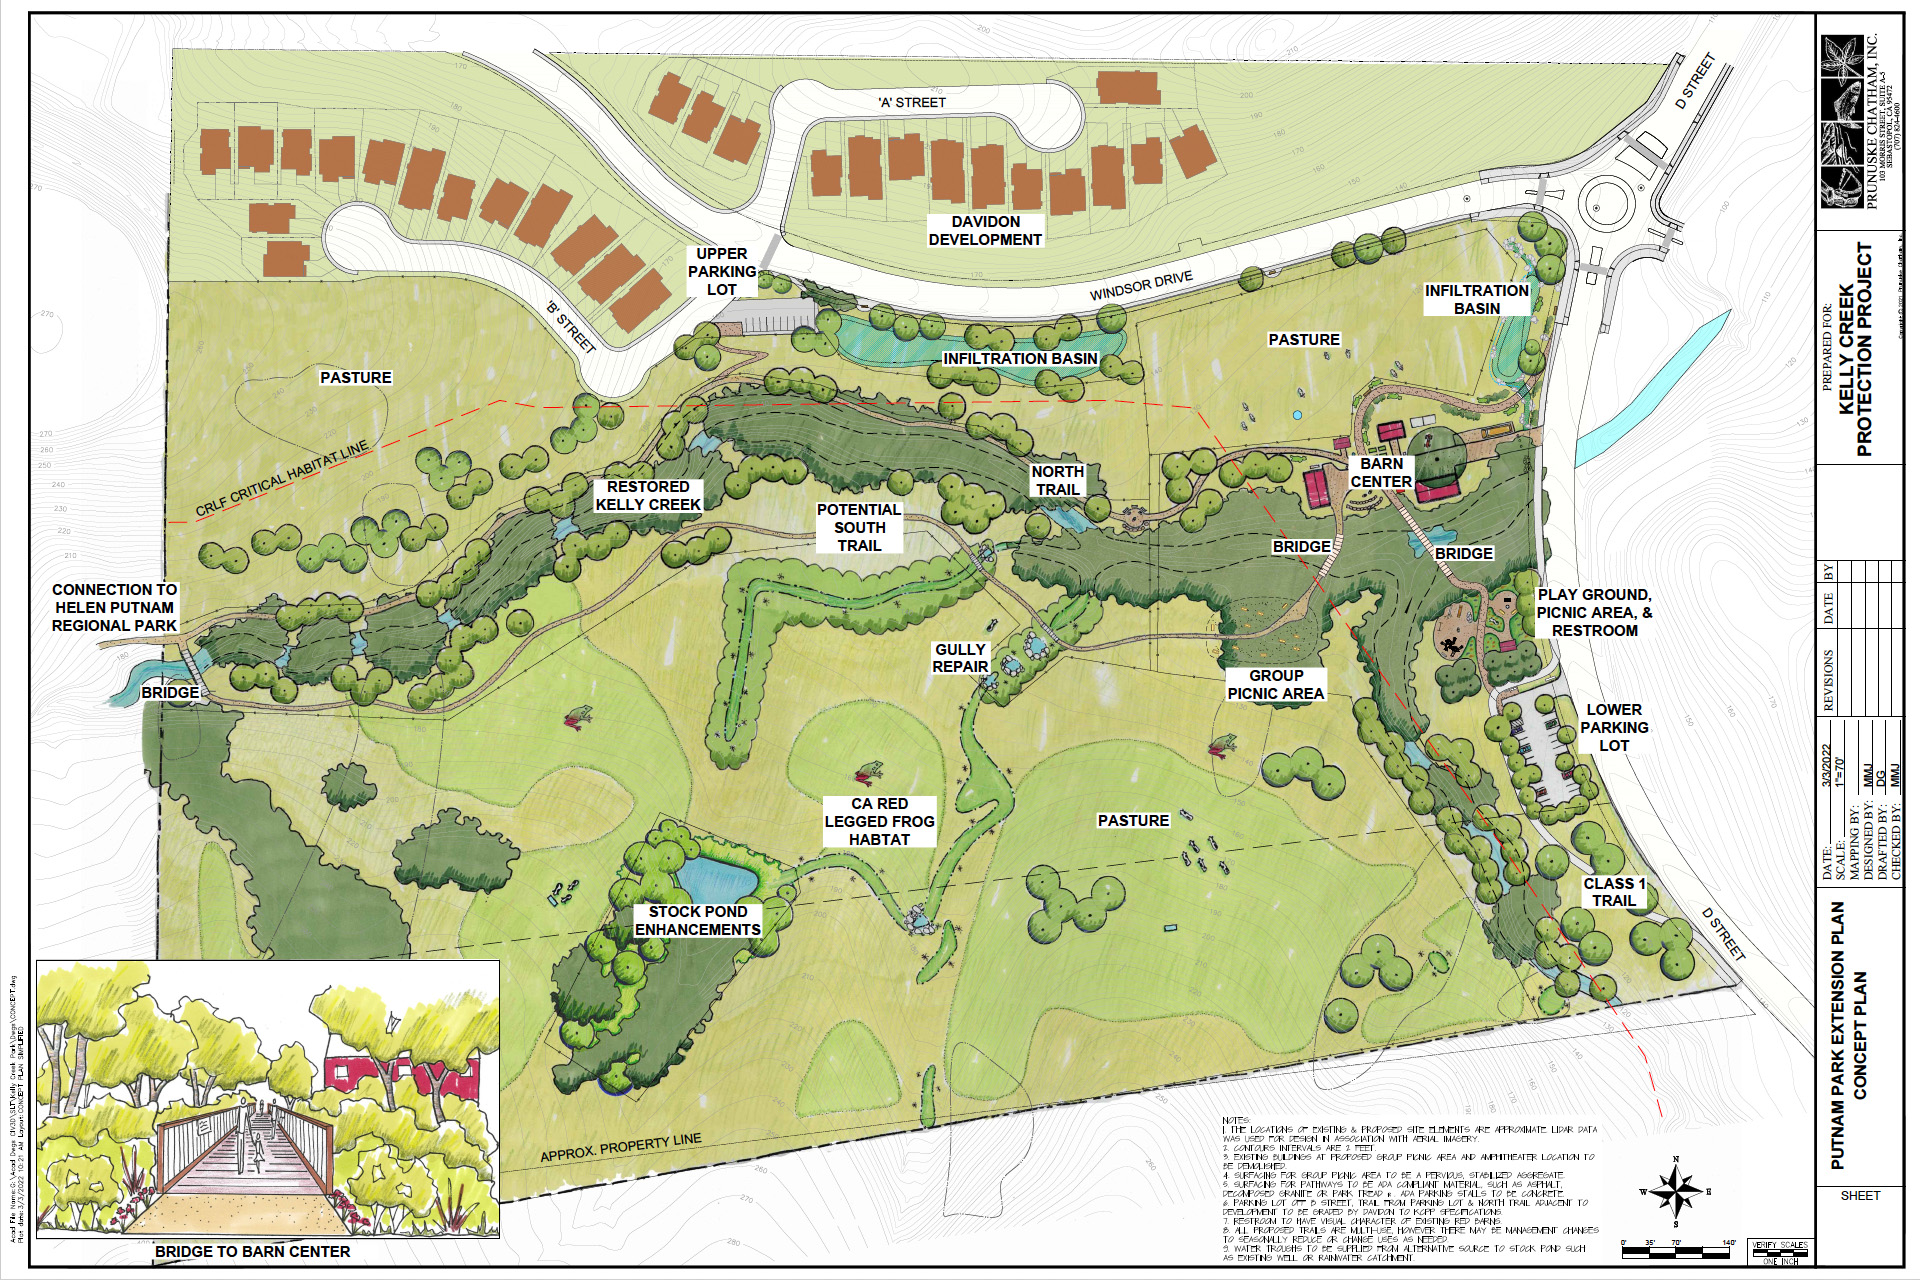 Map of proposed park extension and housing plan. Details include drawings of the proposed homes, new streets, riparian area around Kelly Creek, parking lots, and barn center. The map includes labels that show the two proposed infiltration basins, new trails, and other details. 